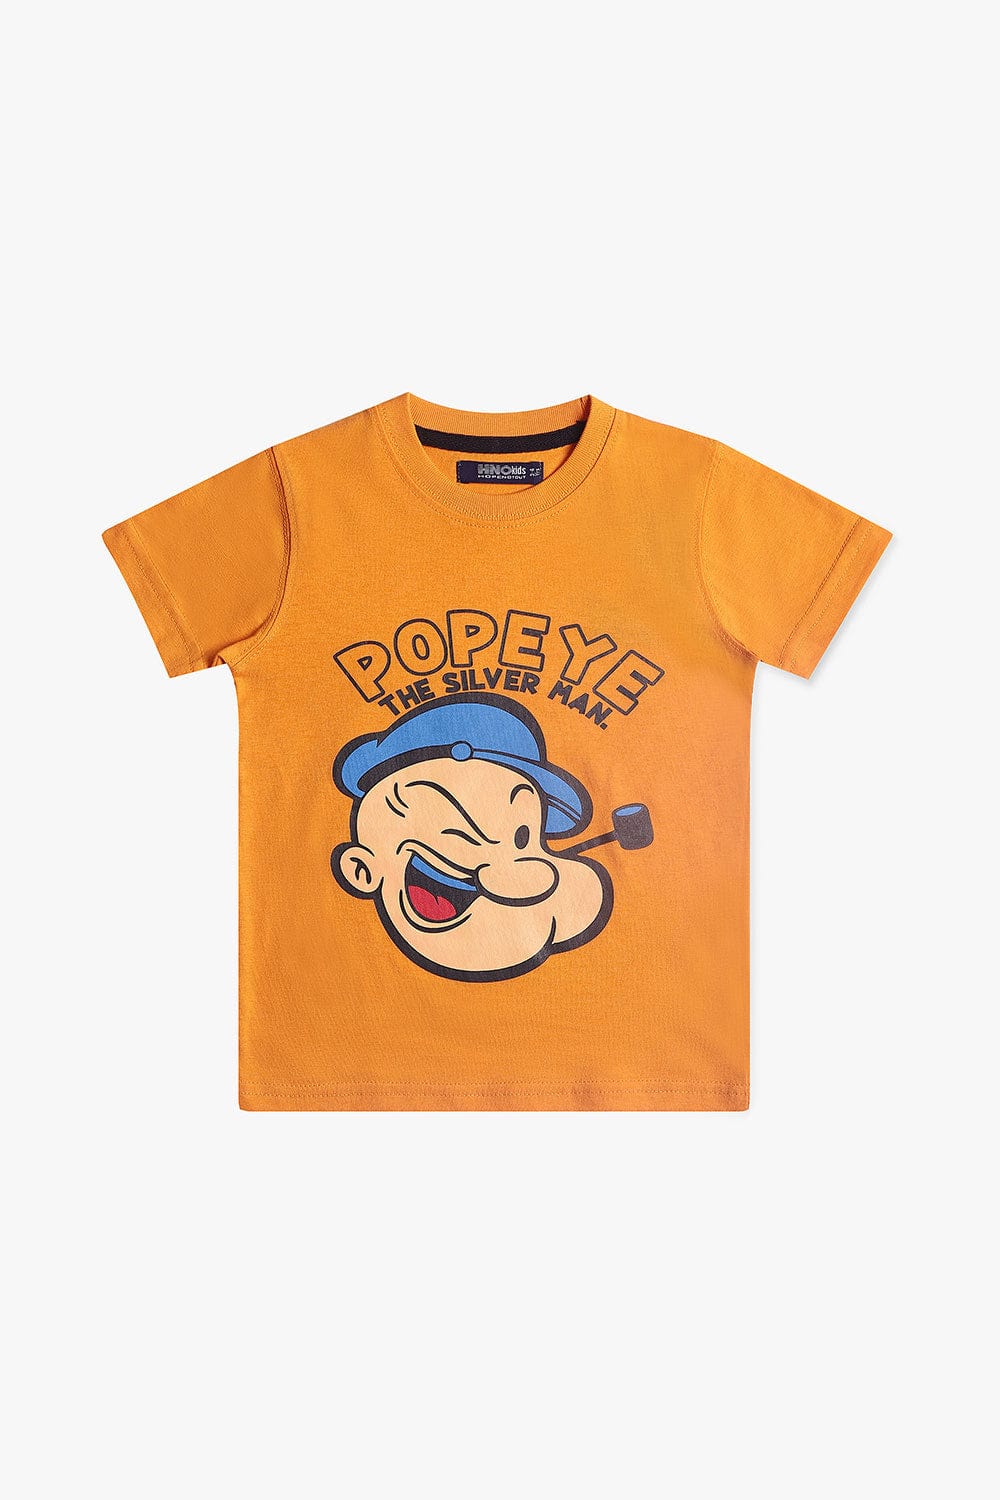 Hope Not Out by Shahid Afridi Boys Knit T-Shirt Popeye T-Shirt